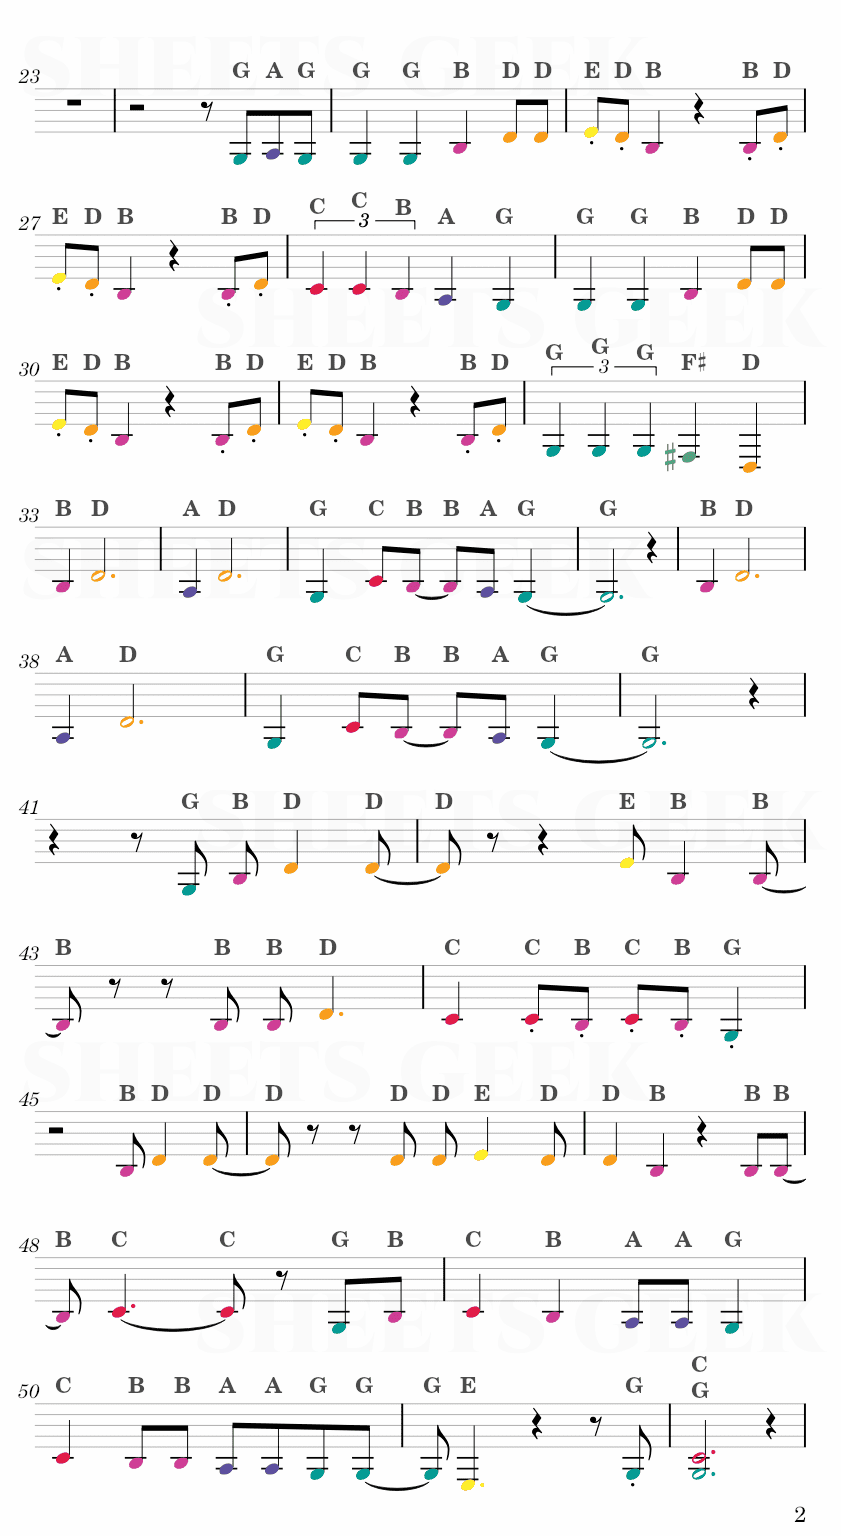 One Day - Matisyahu Easy Sheet Music Free for piano, keyboard, flute, violin, sax, cello page 2